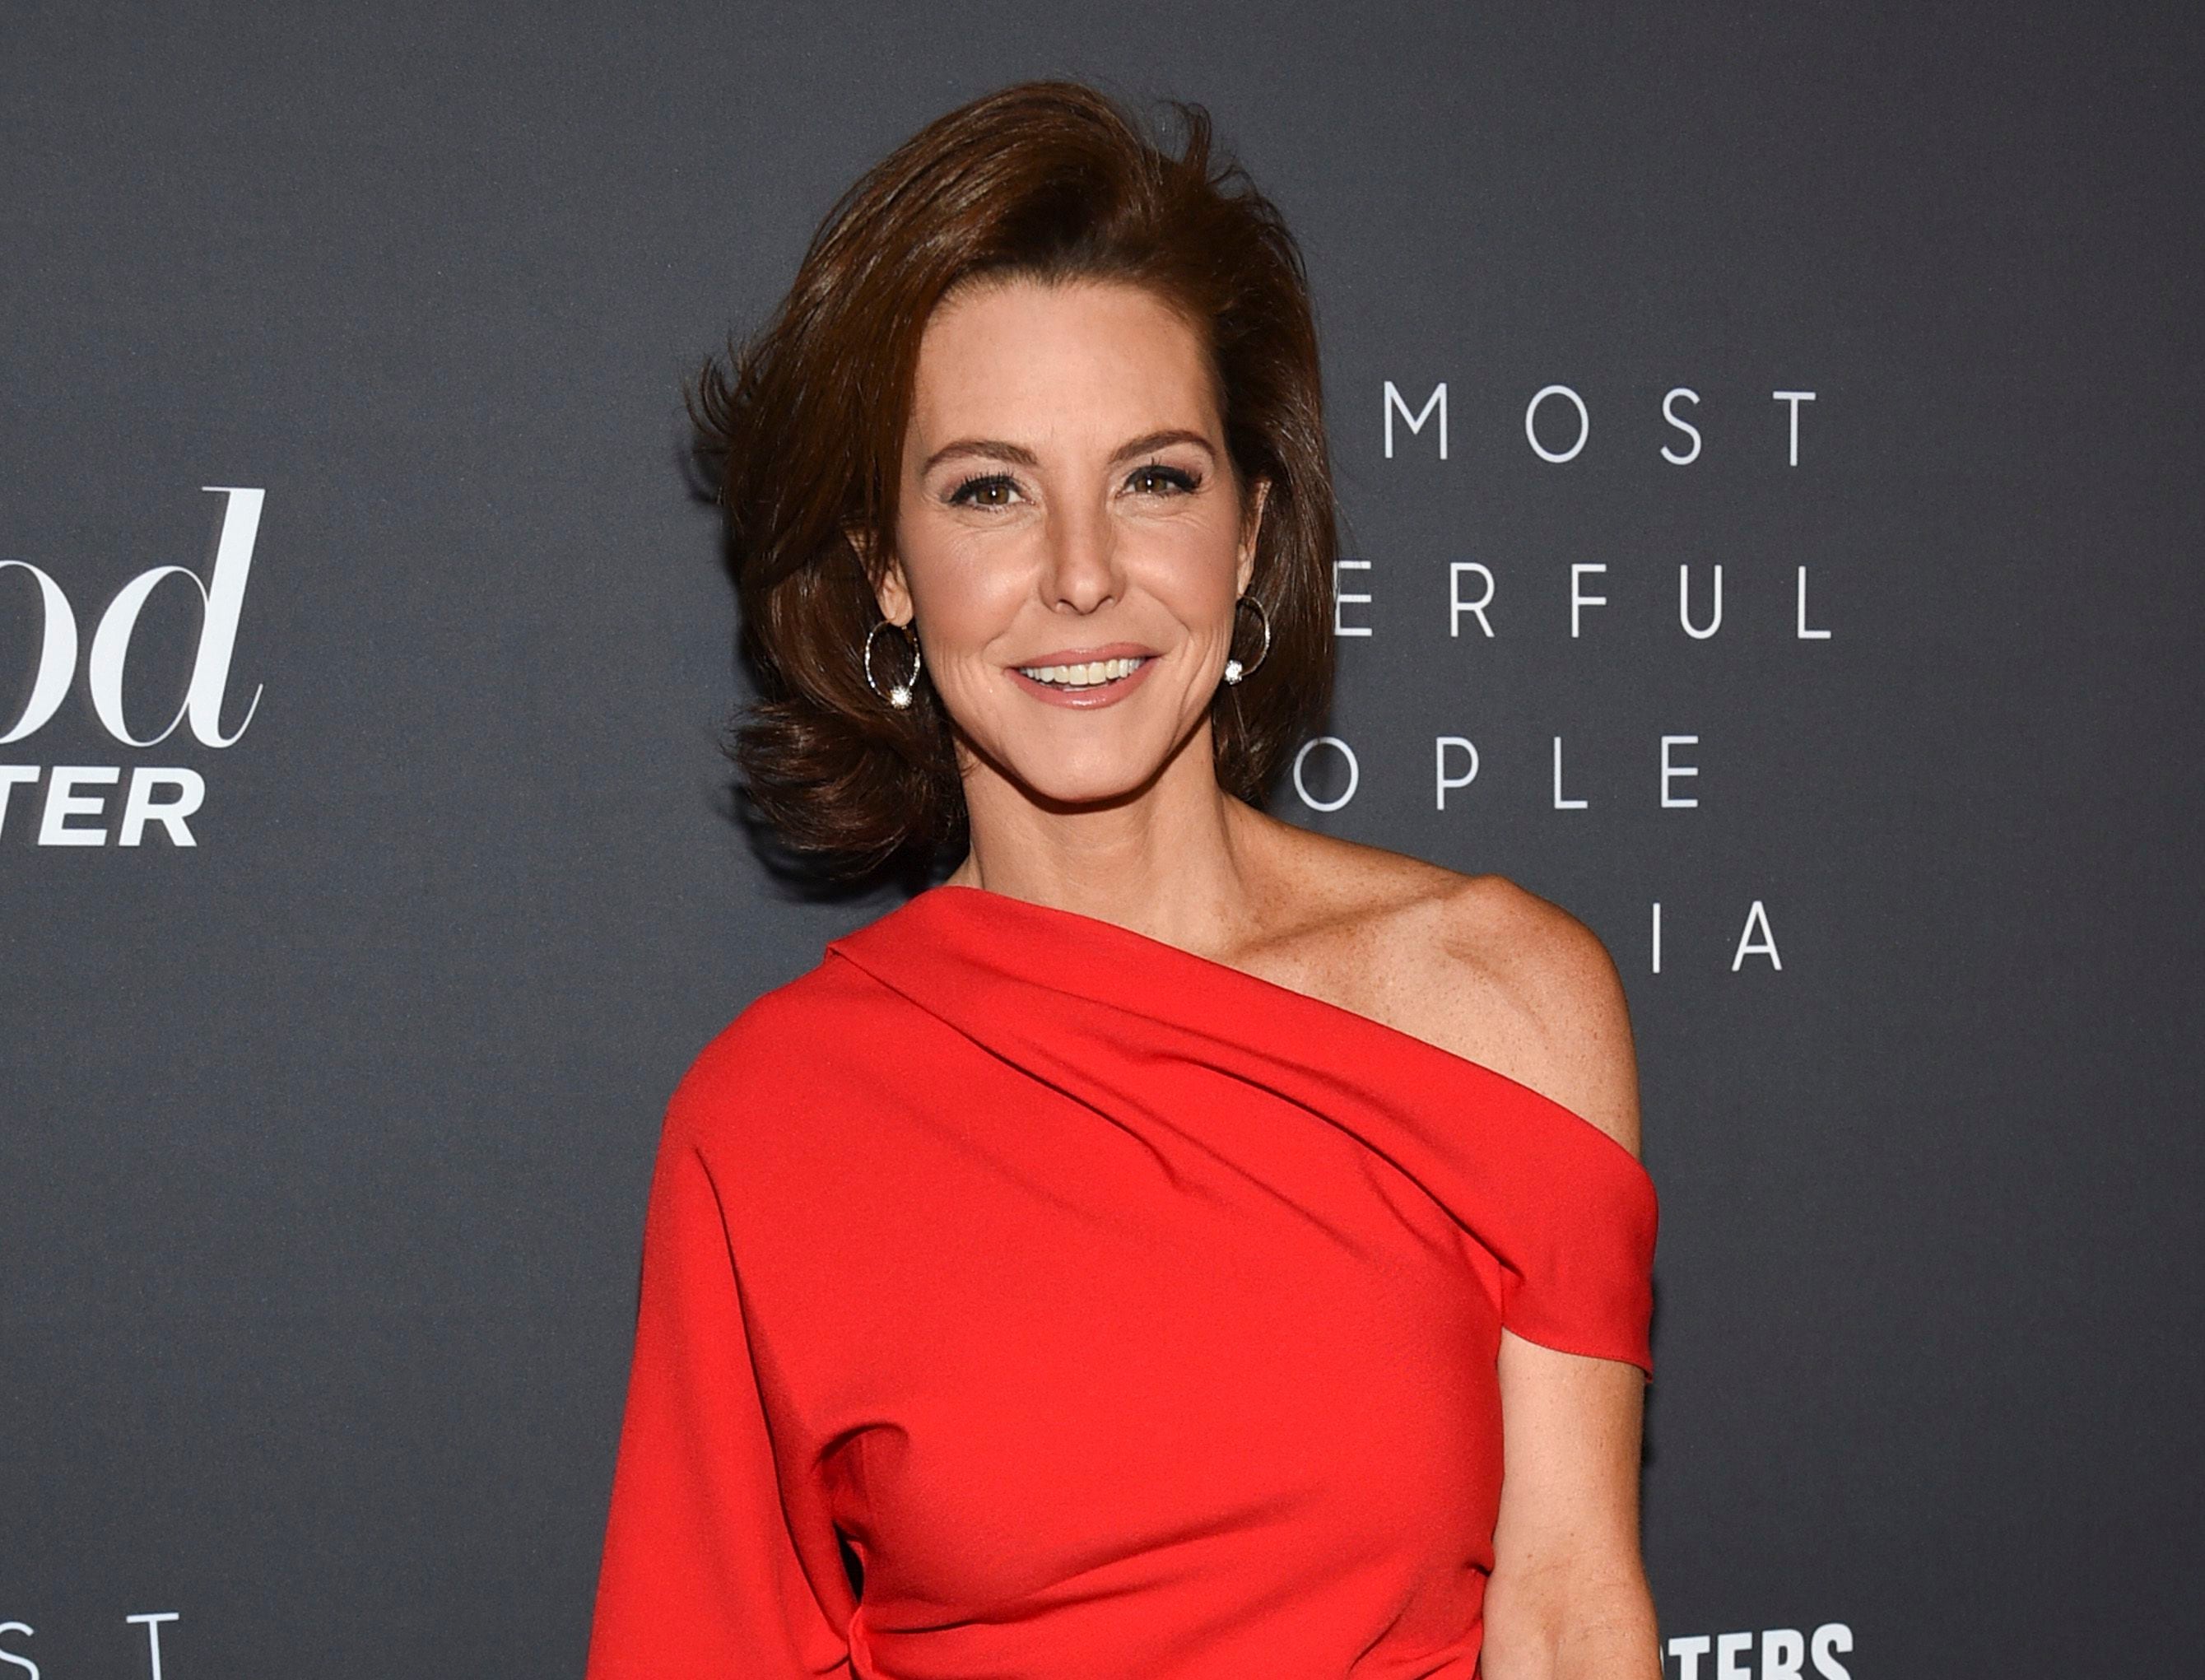 Ruhle replaces Williams on MSNBC; ‘Morning Joe’ expanded